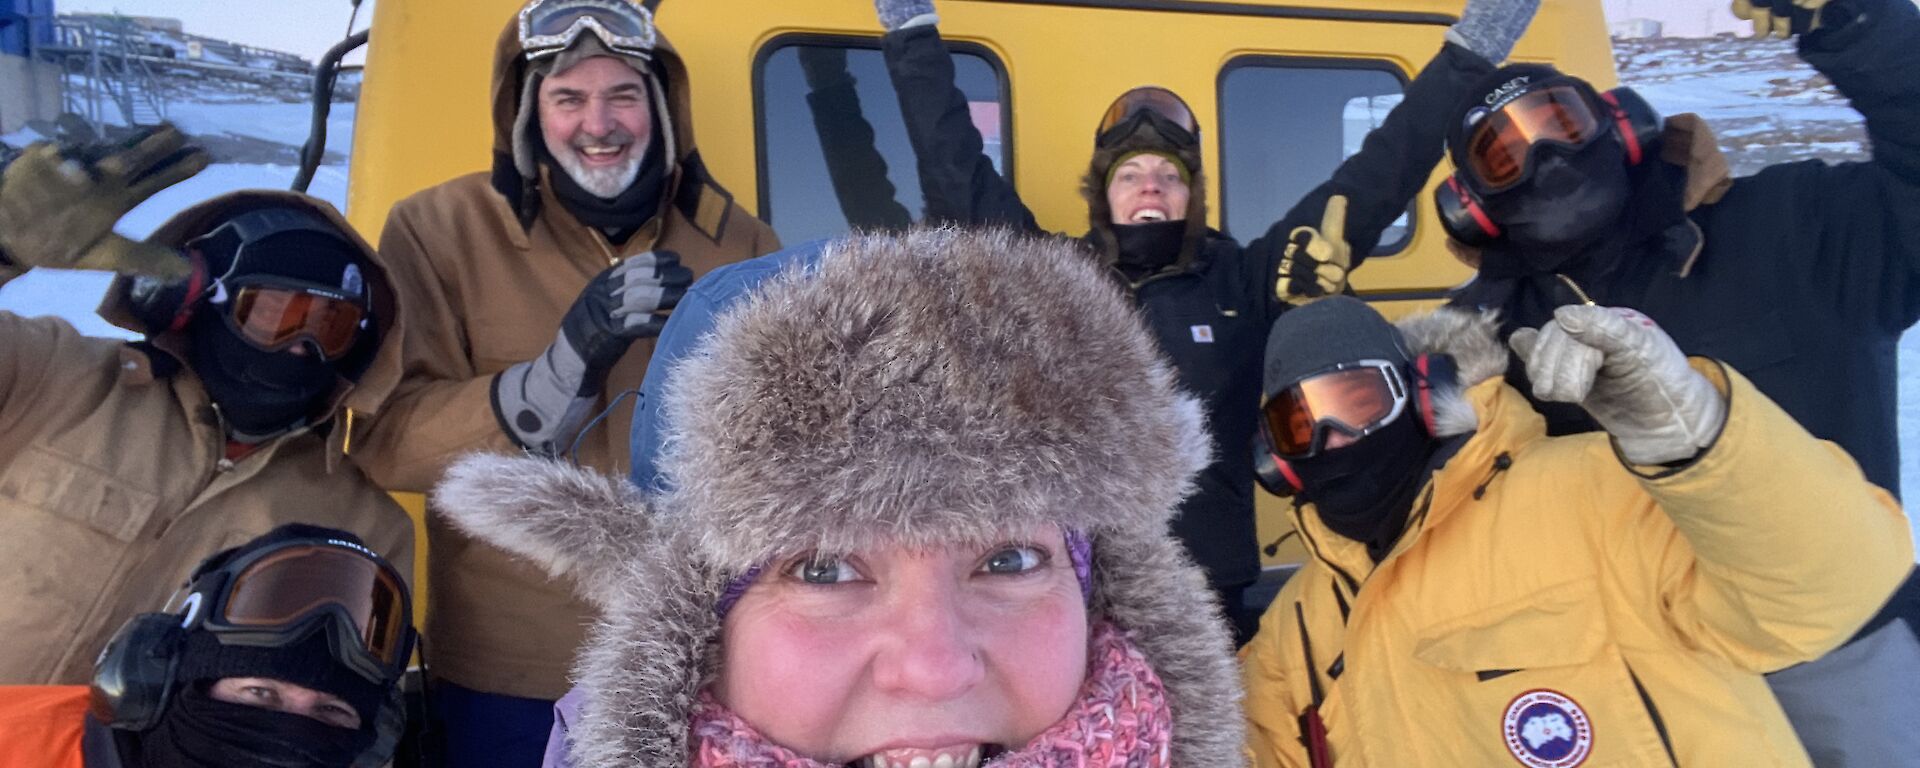 Selfie photo of excited expeditioners standing in front of the yellow Hagglund vehicle.